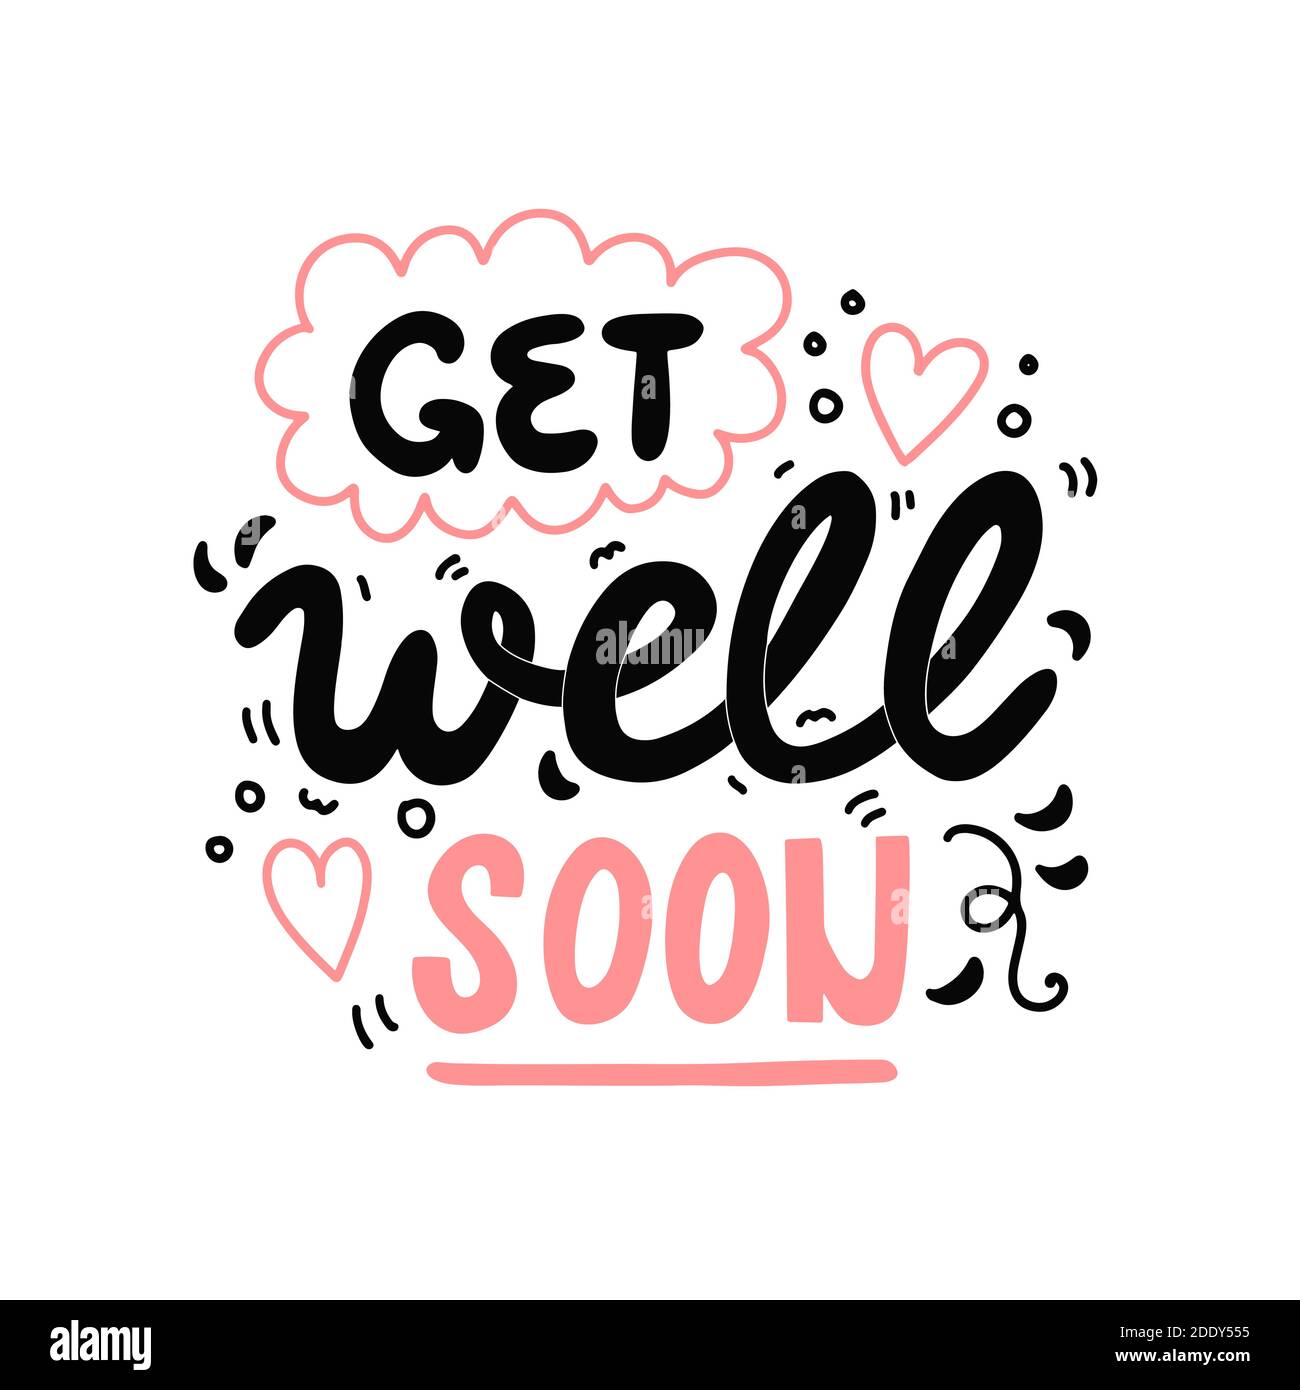 Get well soon, vector hand drawn lettering Stock Vector